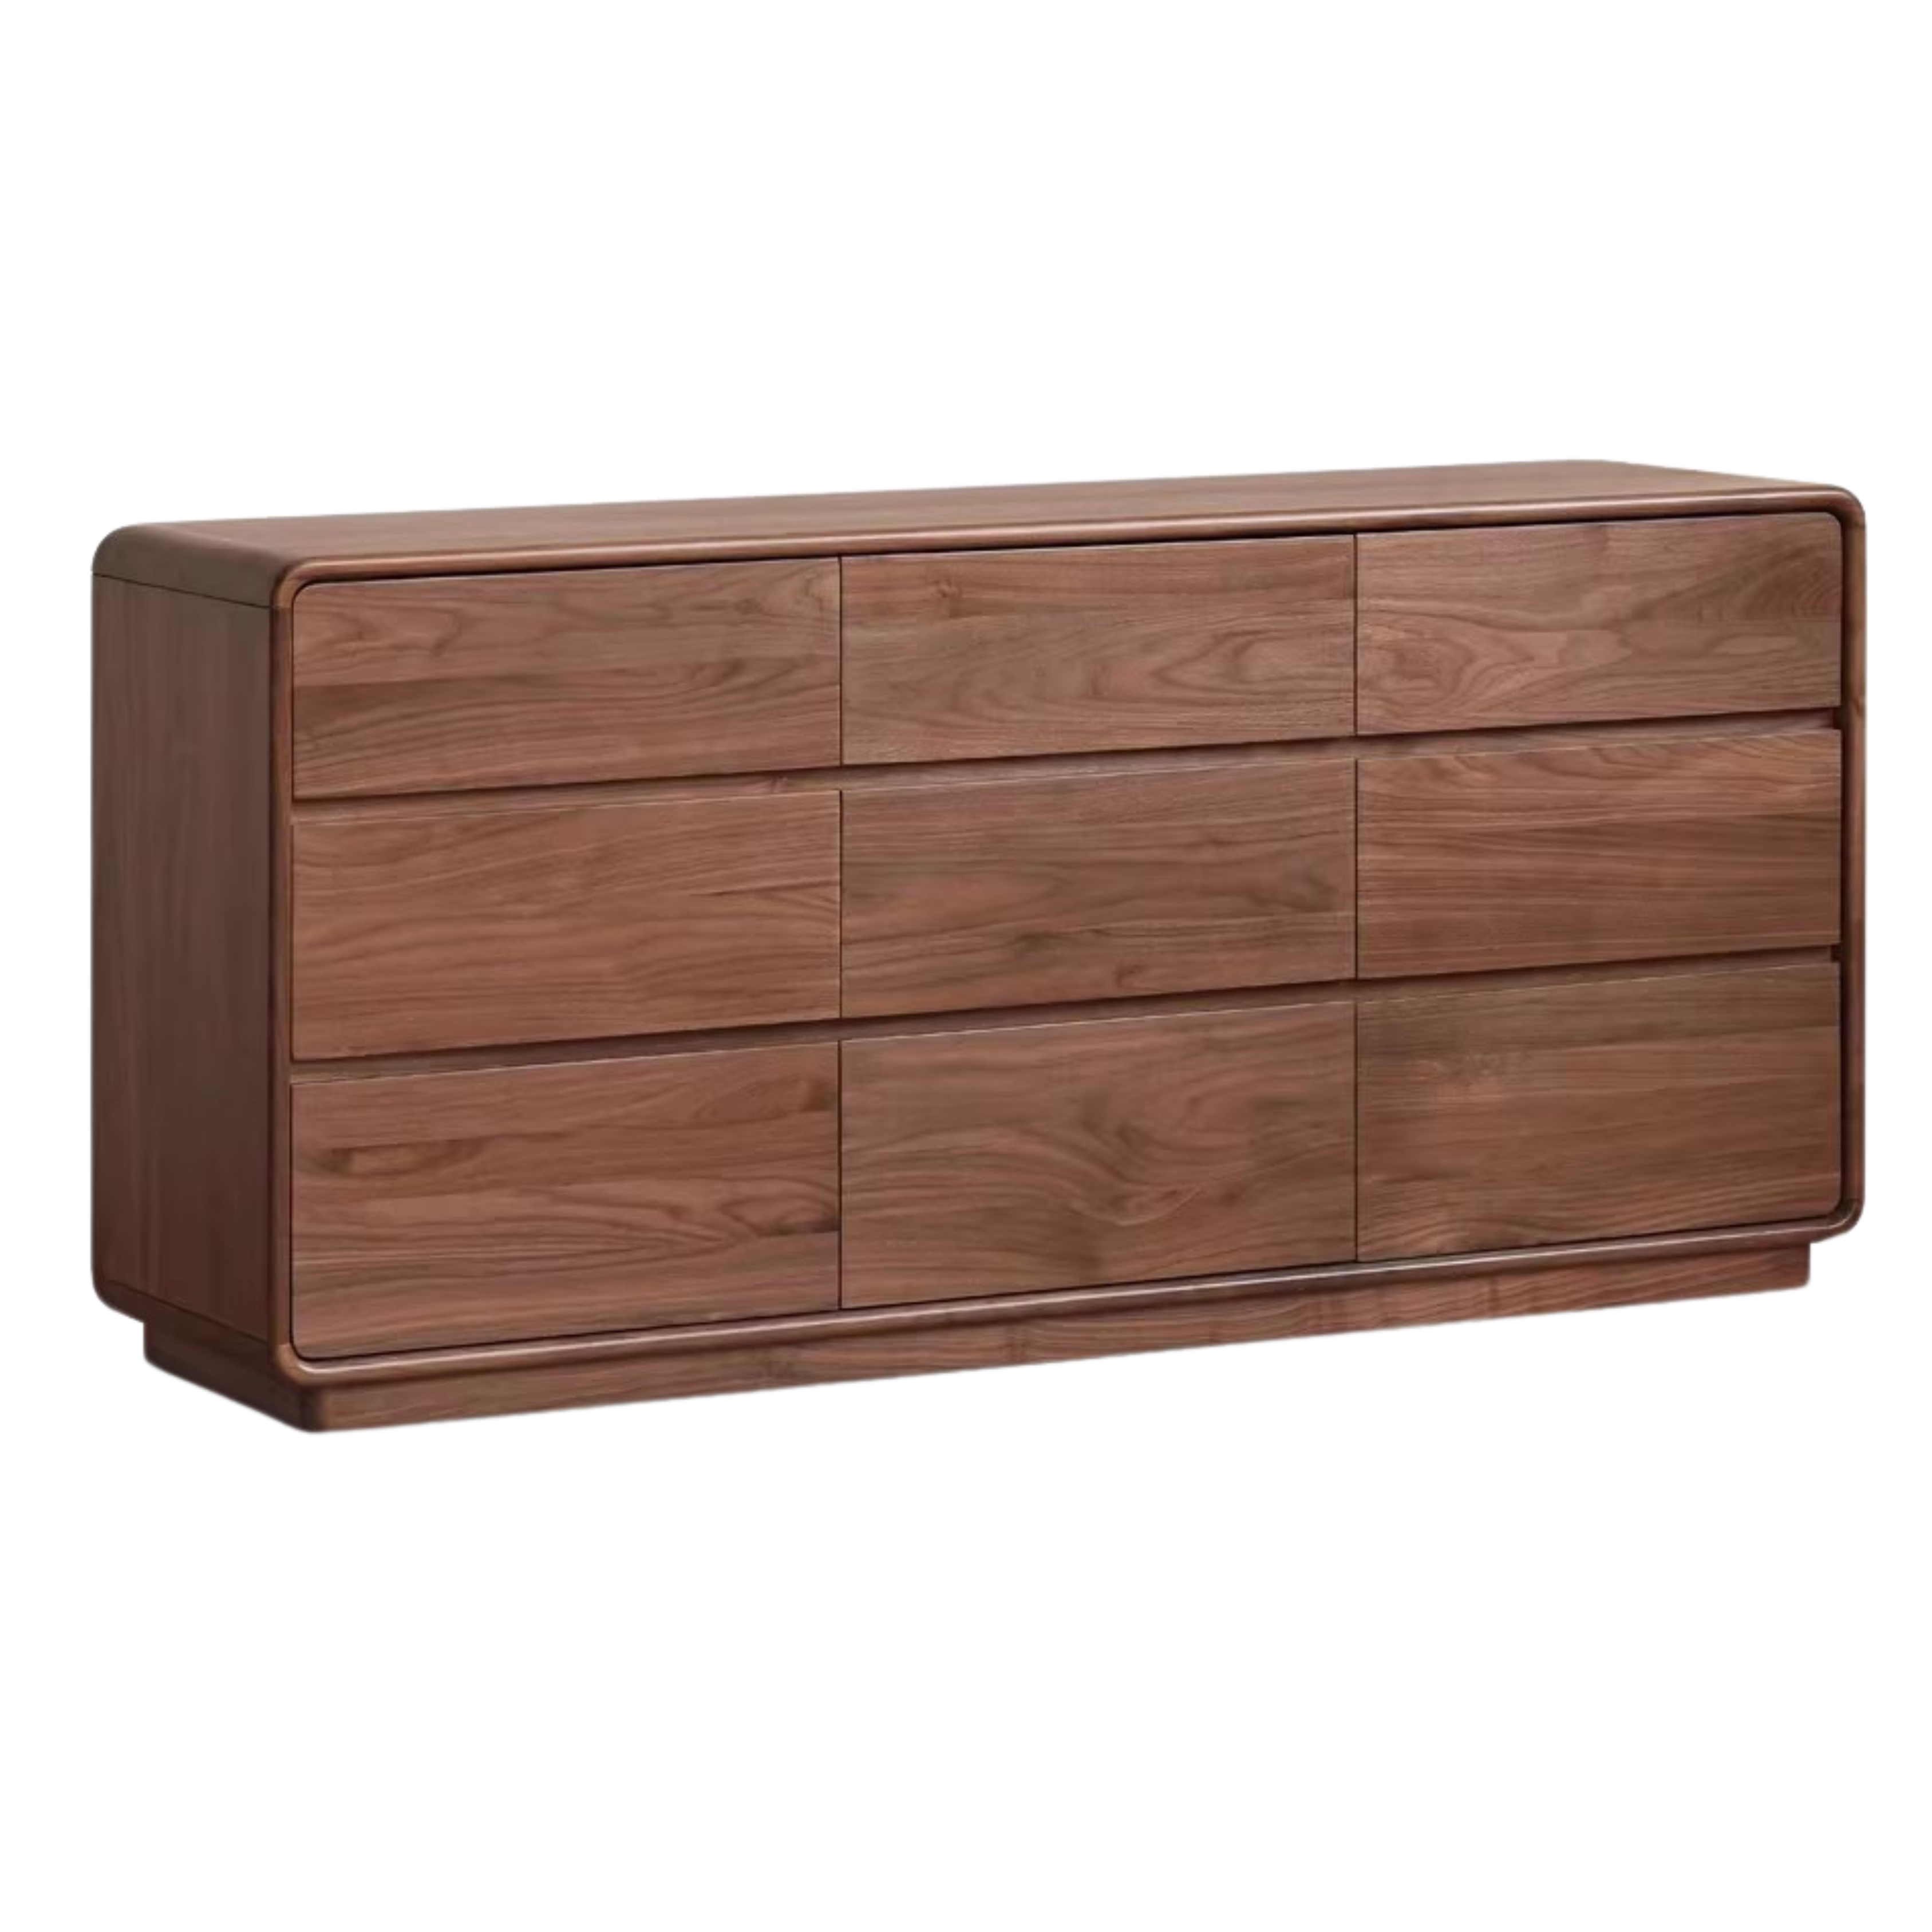 Black Walnut solid Wood Storage Cabinet chest of drawers)